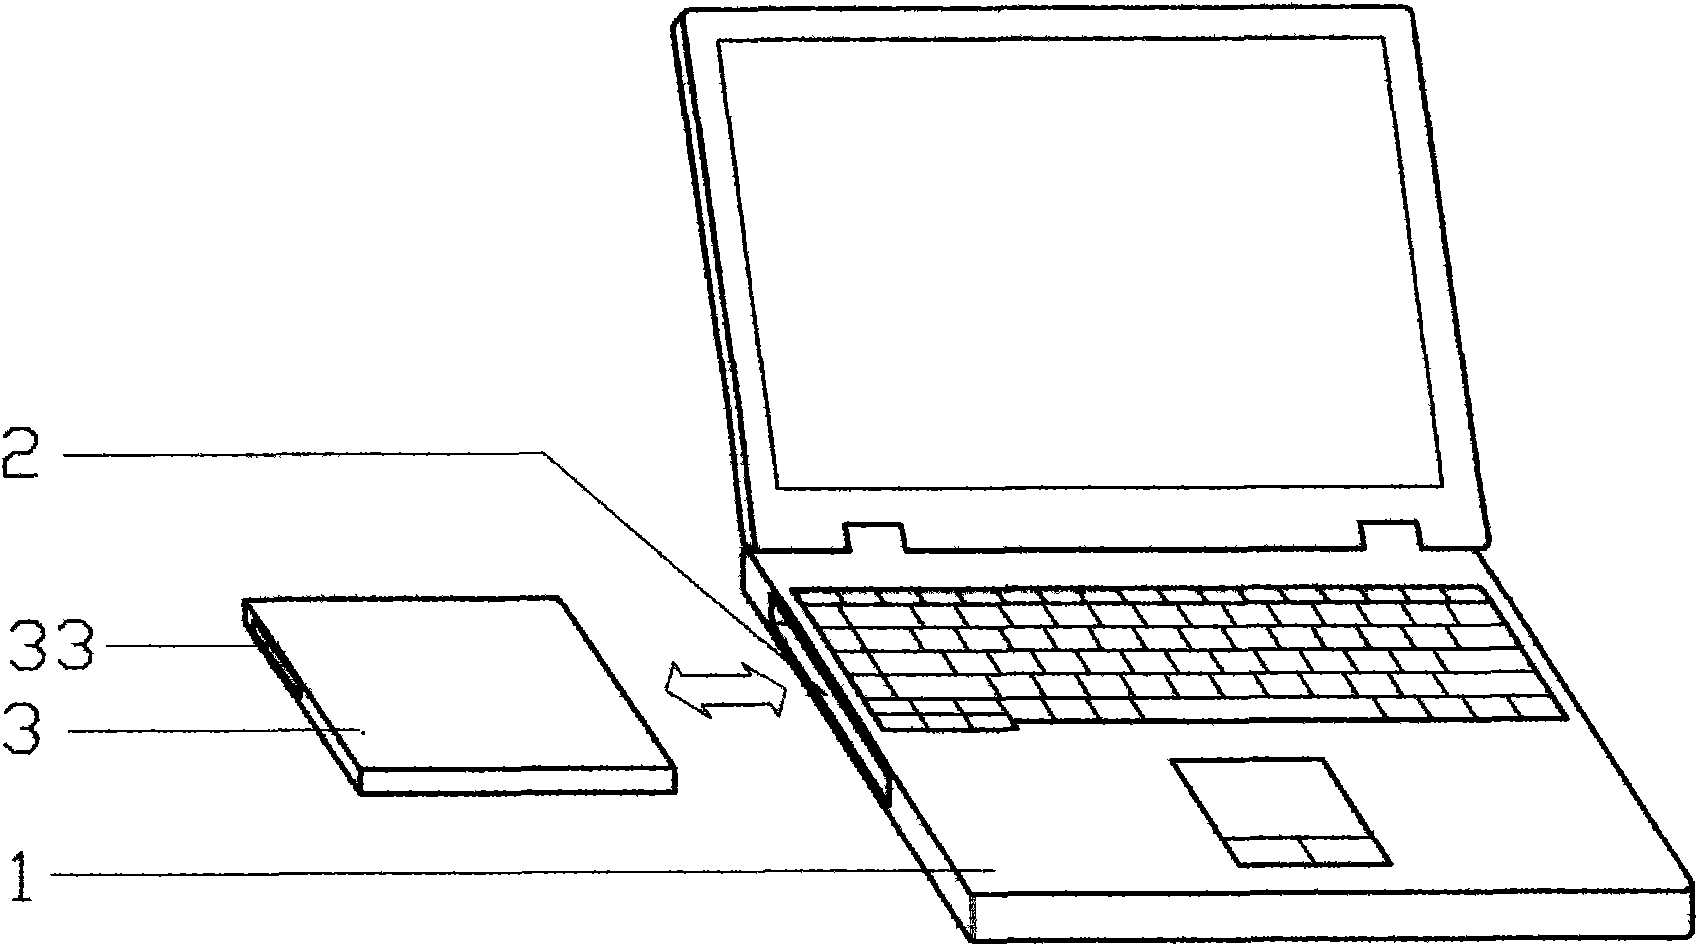 Notebook computer system with modular function expansion structure and removable functional expansion module